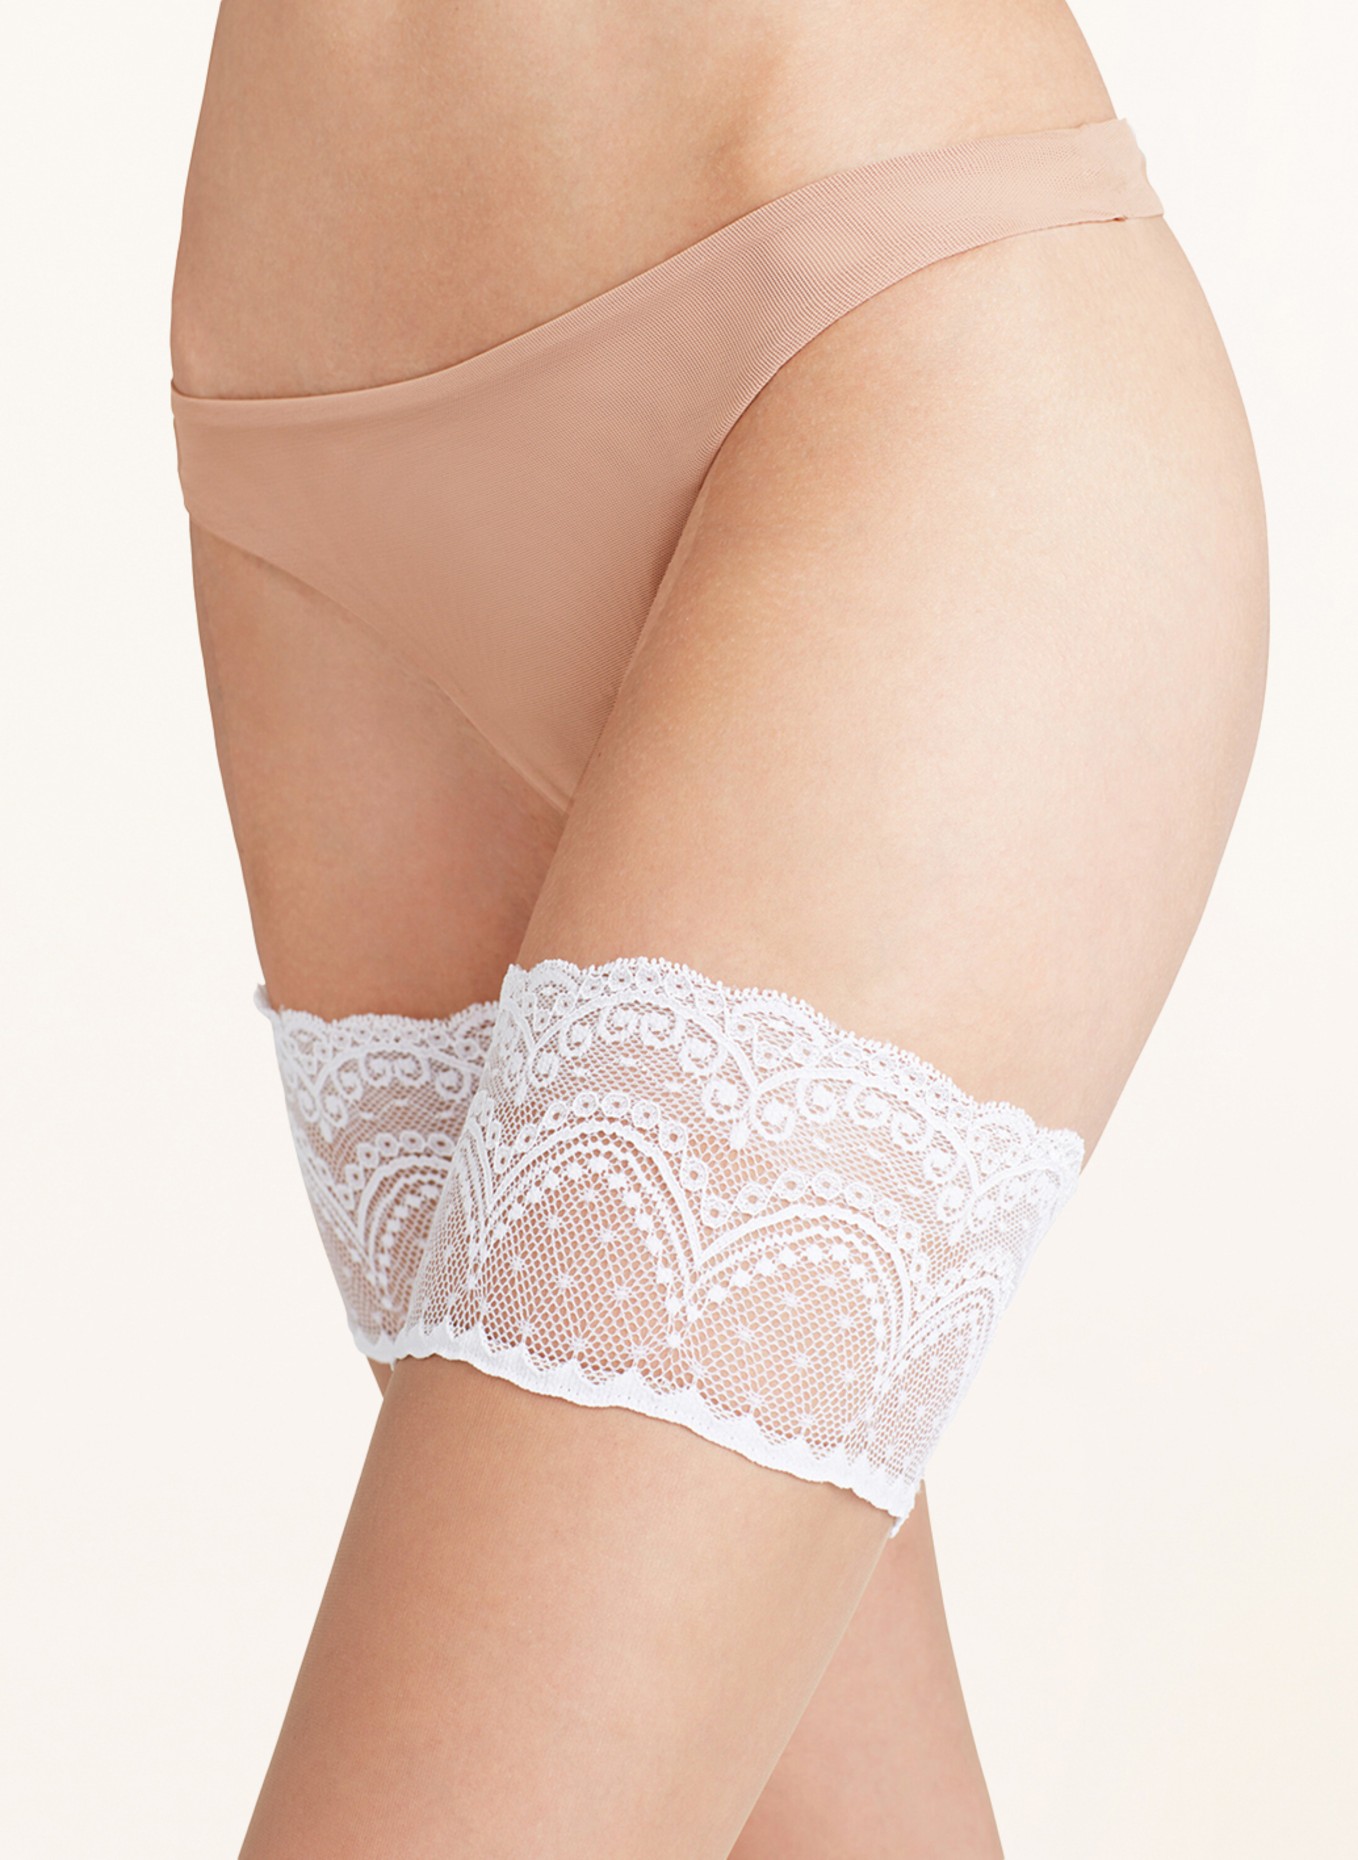 FALKE Stay-up stockings INVISIBLE DELUXE , Color: 0992 BRAS/WHITE (Image 2)